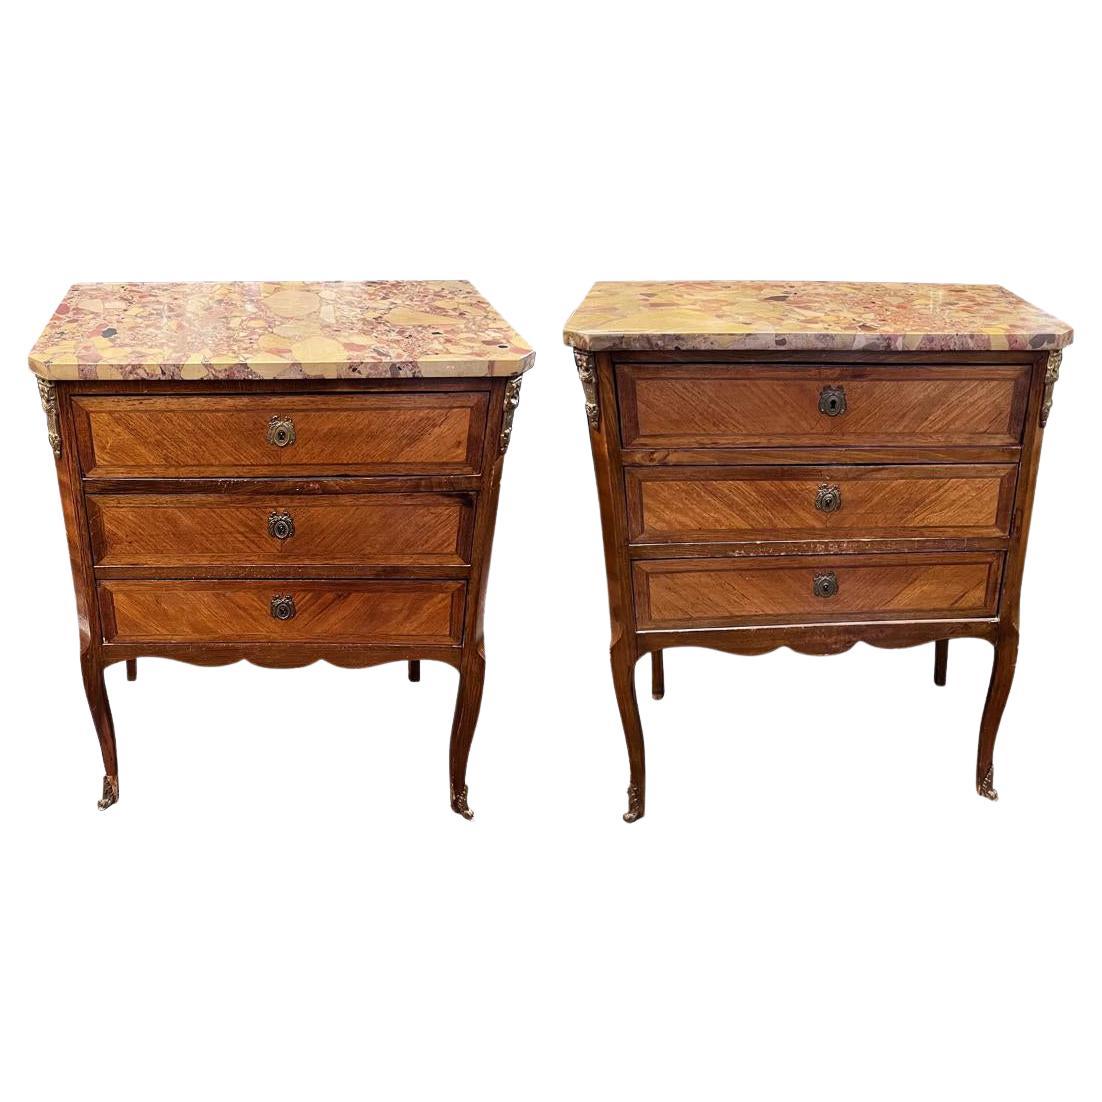 Pair of French Neoclassic Nightstands